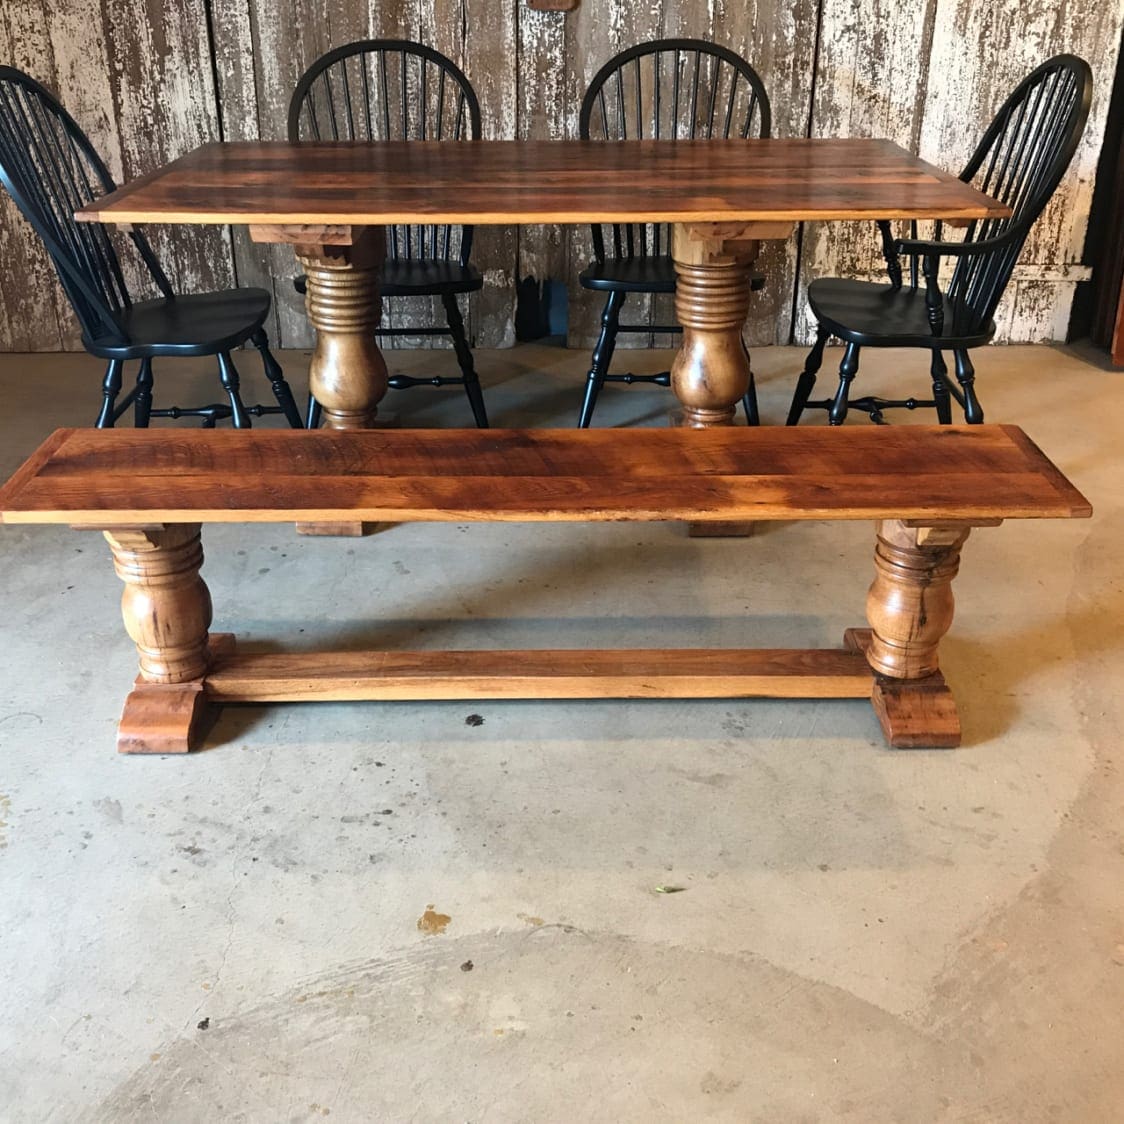 Rustic bench, Farmhouse table and Bench